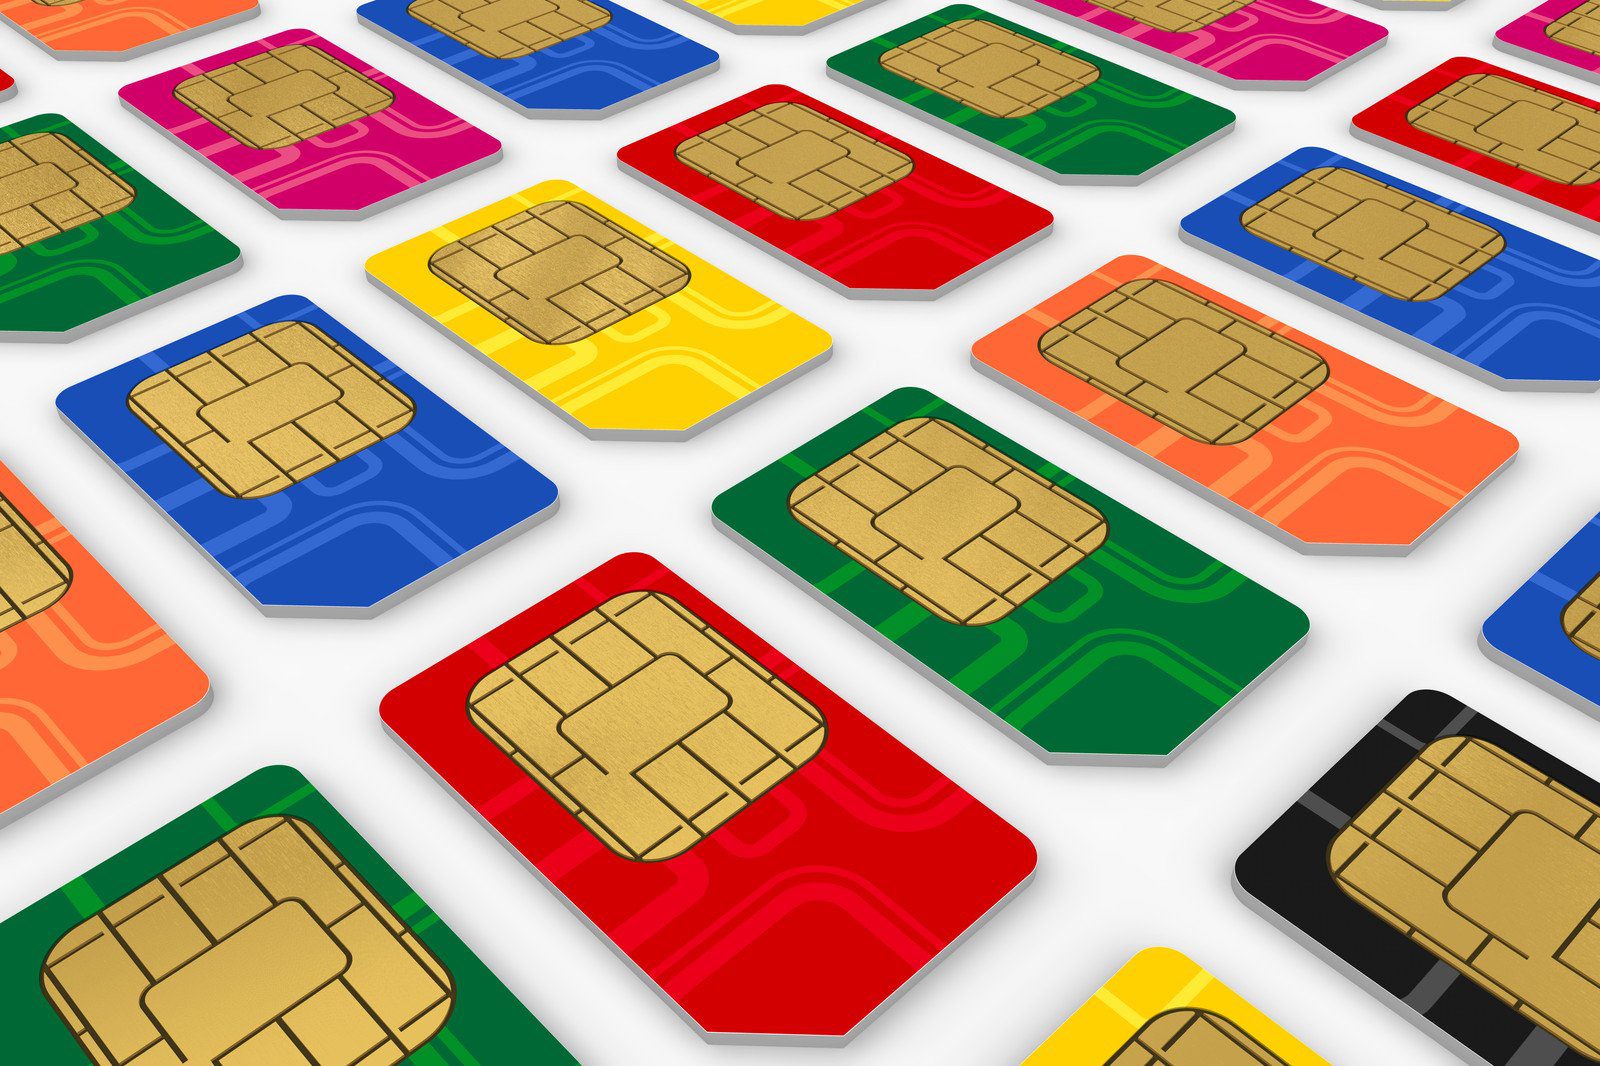 Mobile or Cell Phone SIM Cards